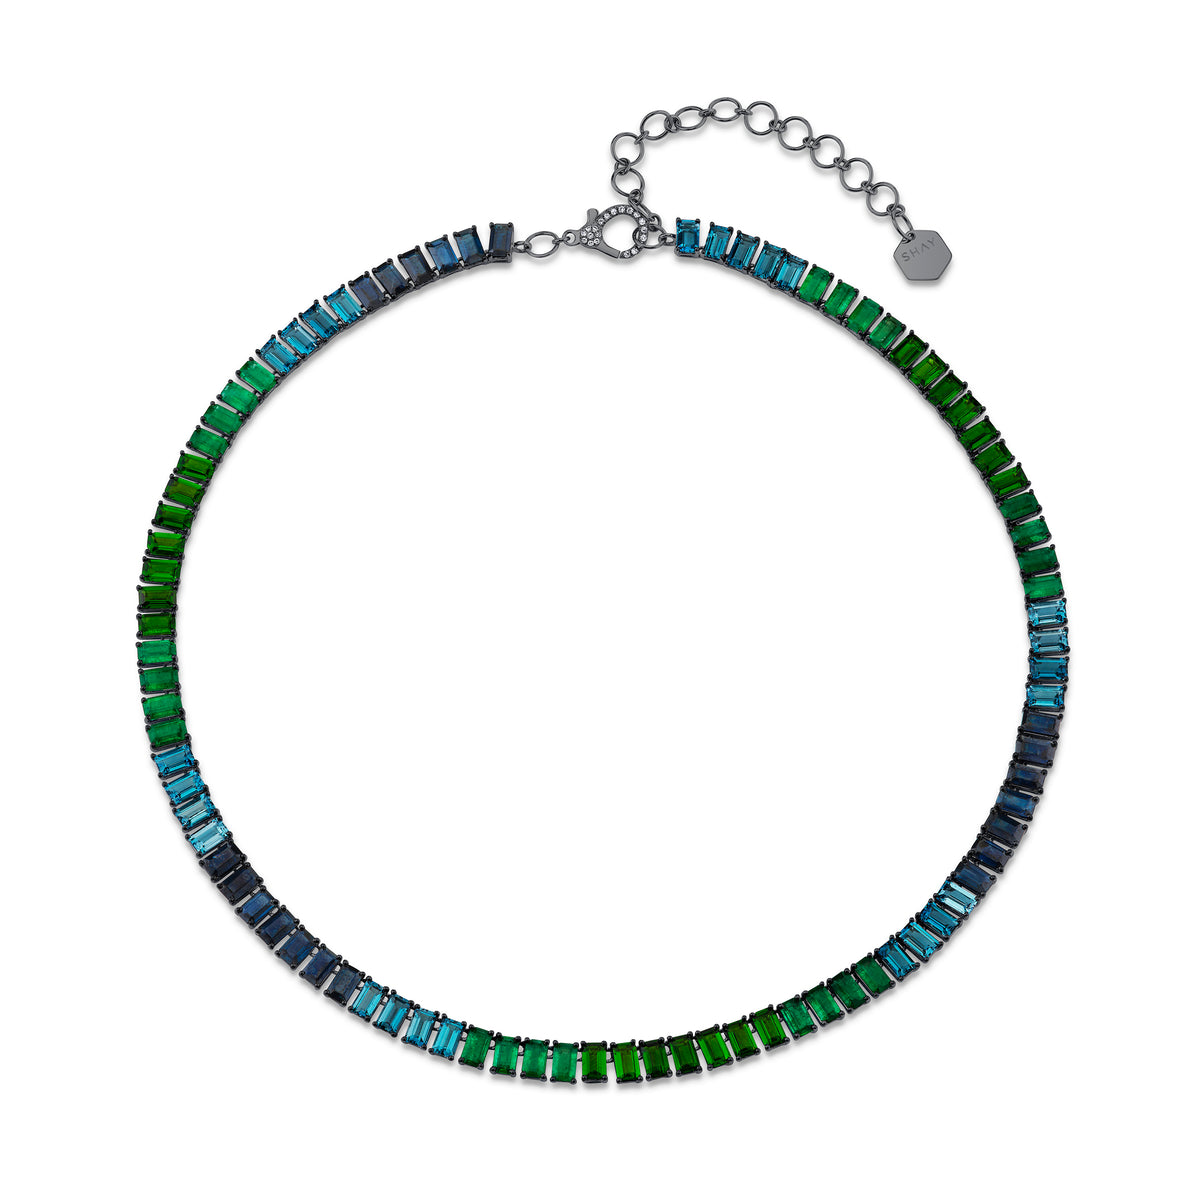 EMERALD OMBRE ETERNITY NECKLACE